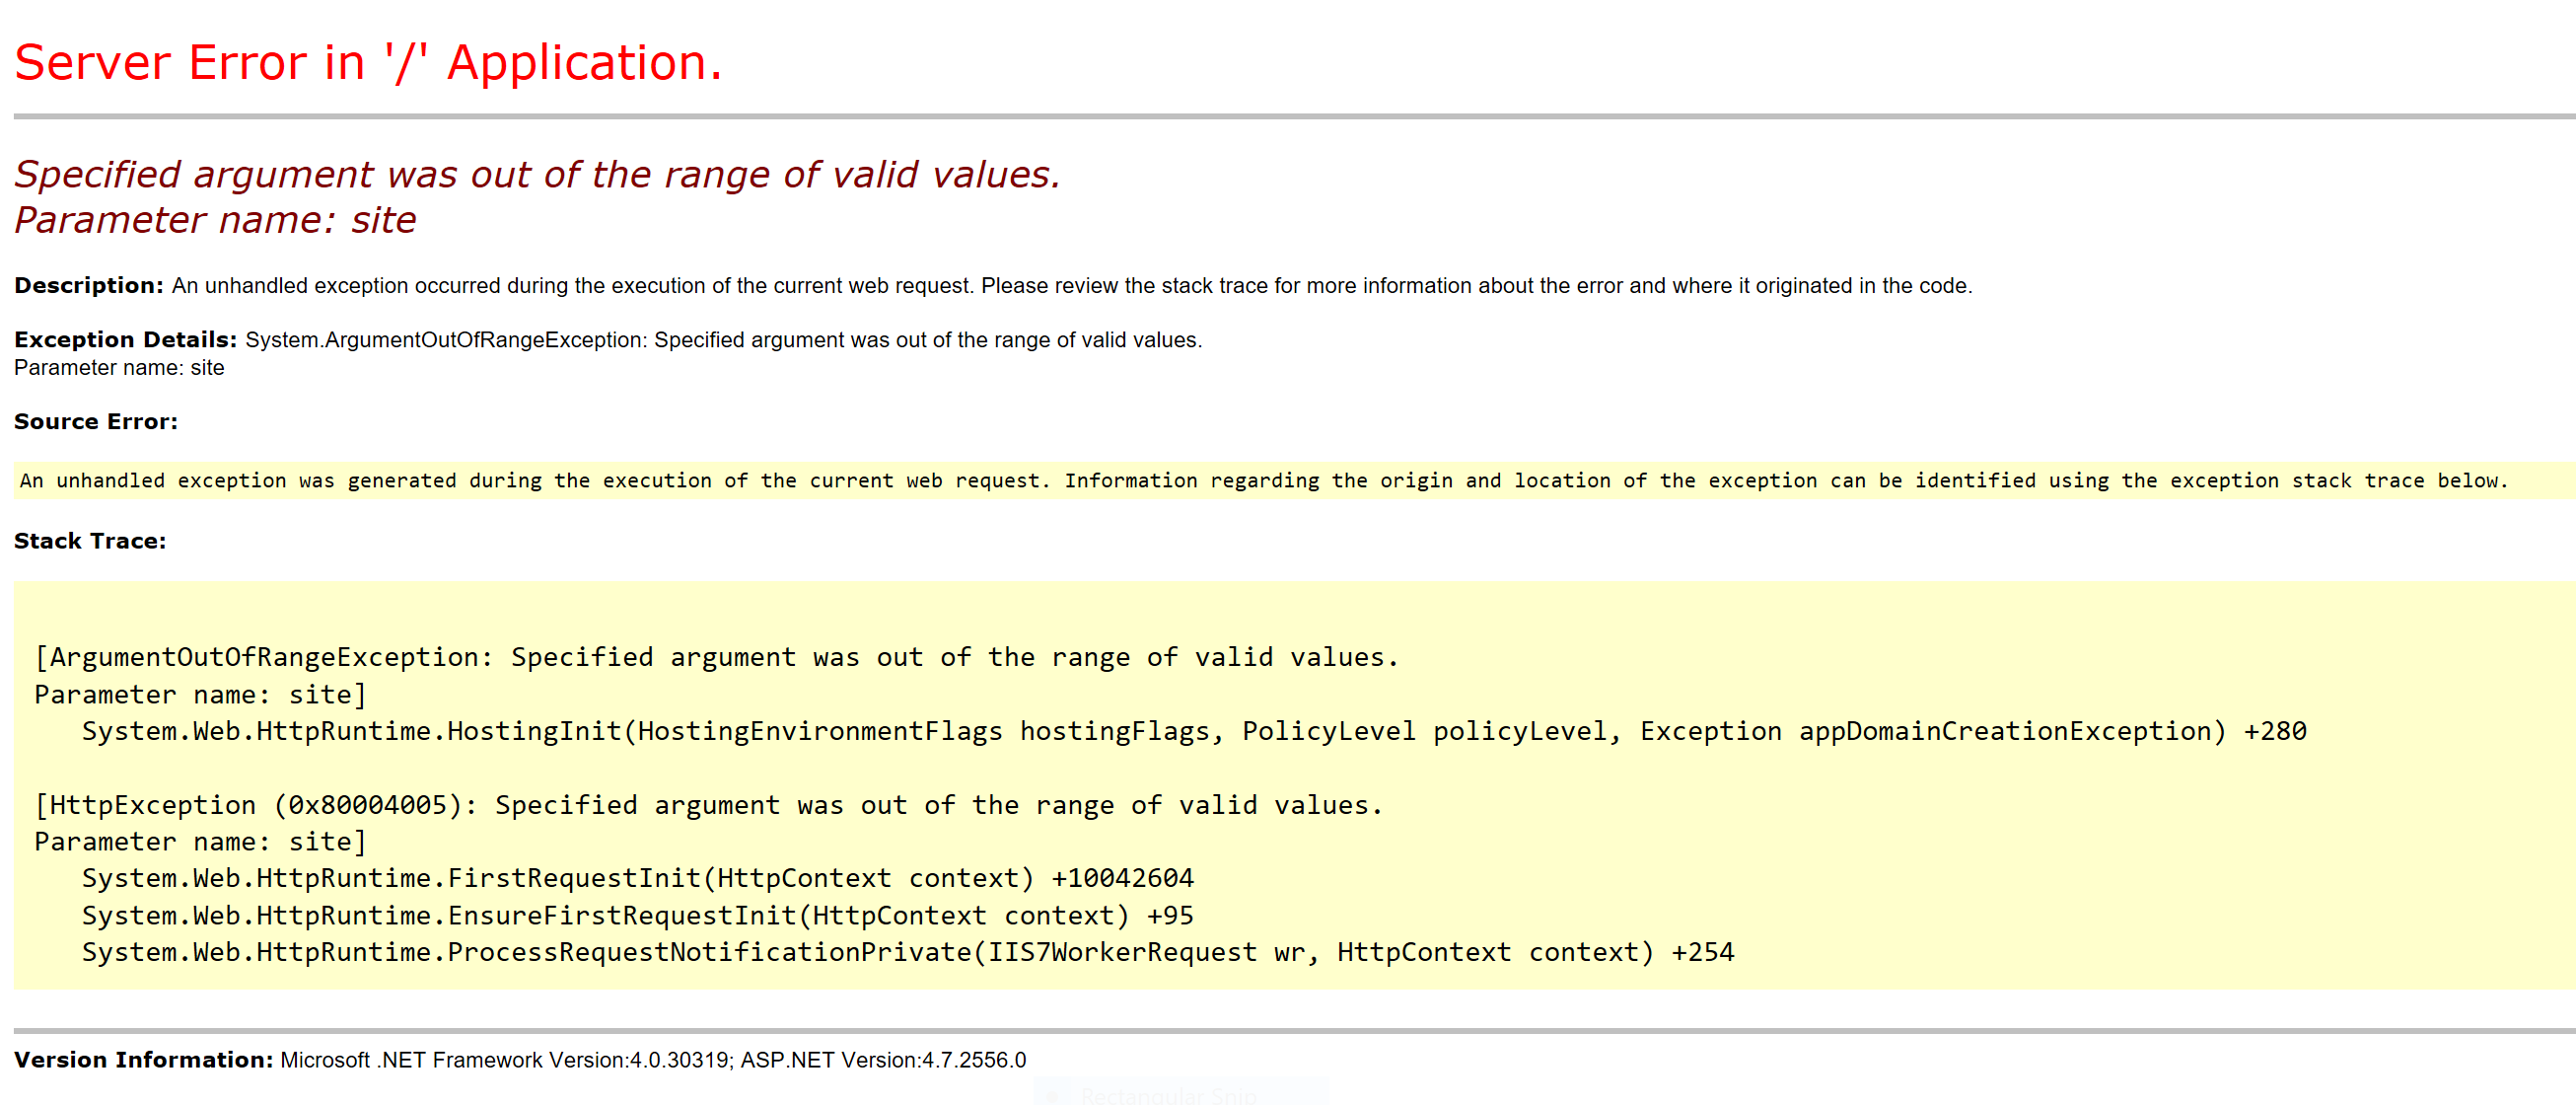 Specified argument was out of the range of valid values 0x800004005